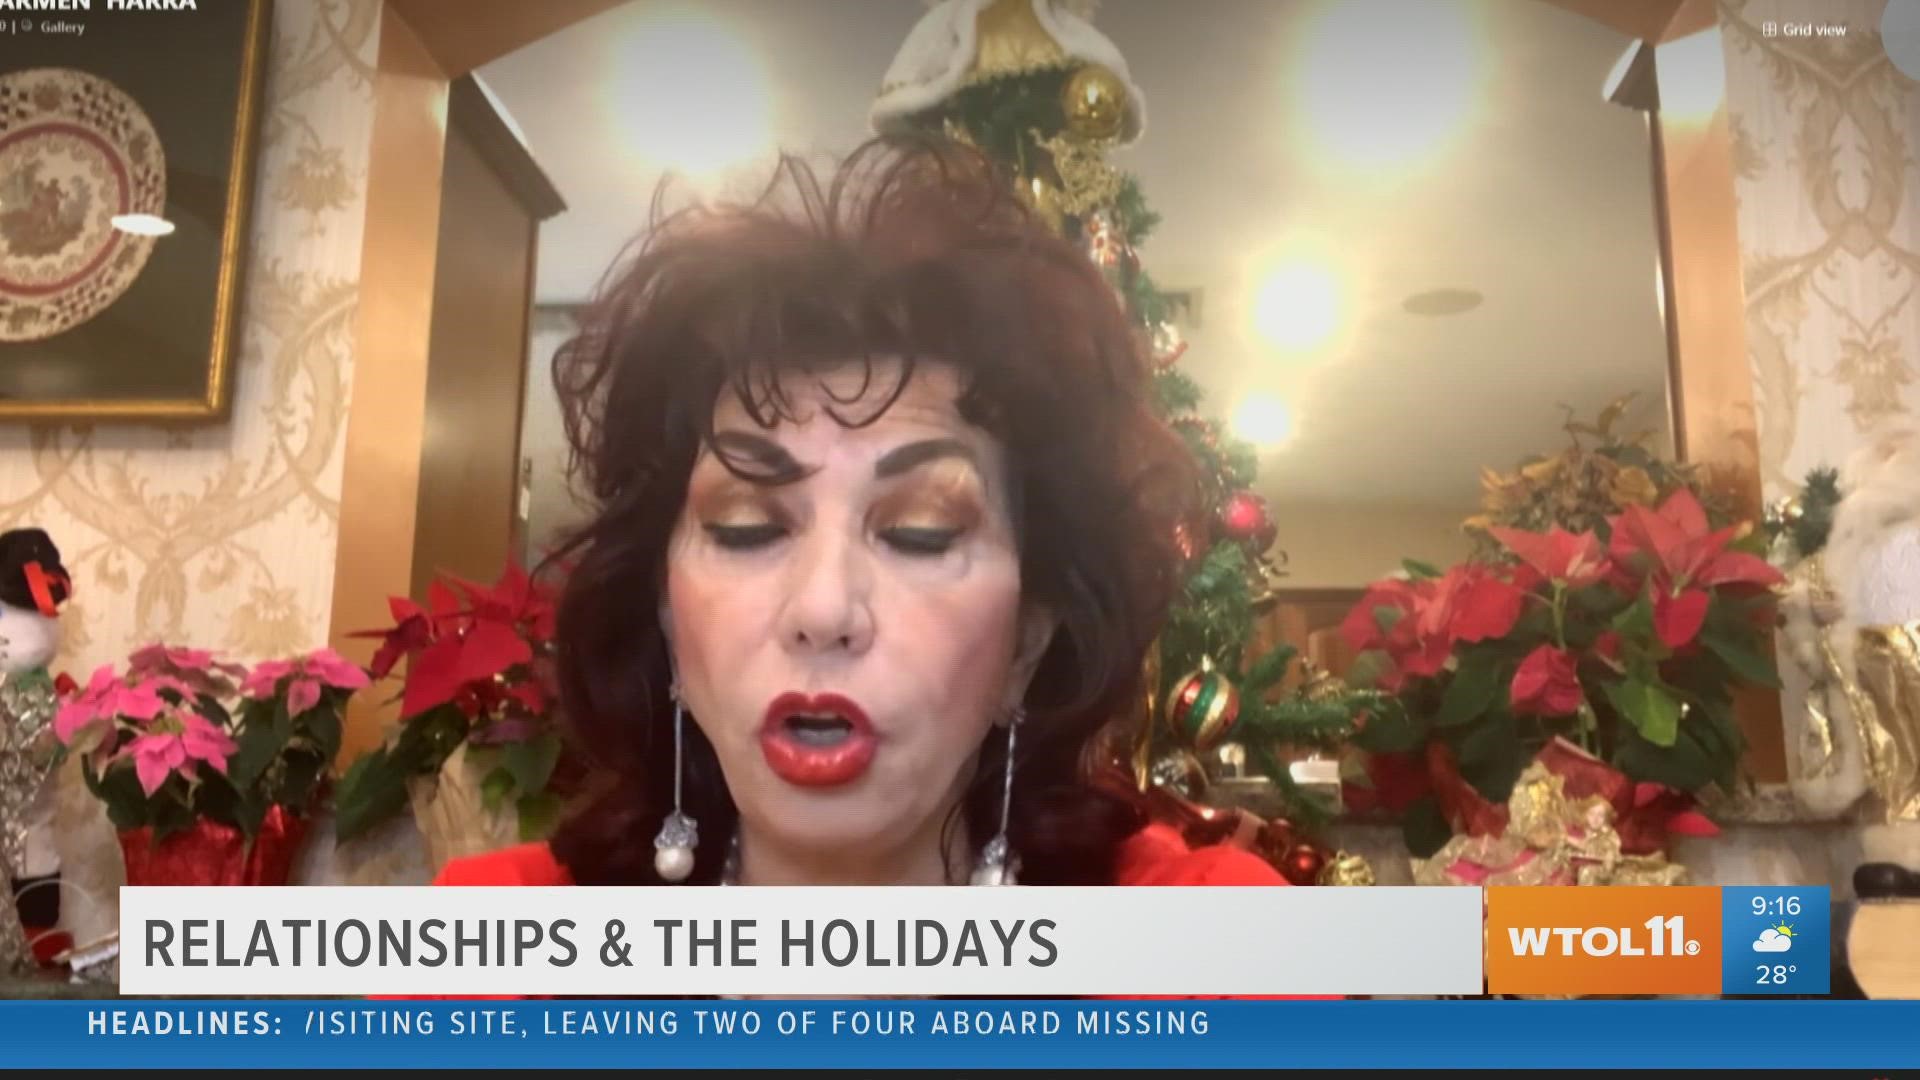 Relationships face difficulty around the holidays as we get out of our regular routine. Psychologist Carmen Harra gives us ways to work things out.